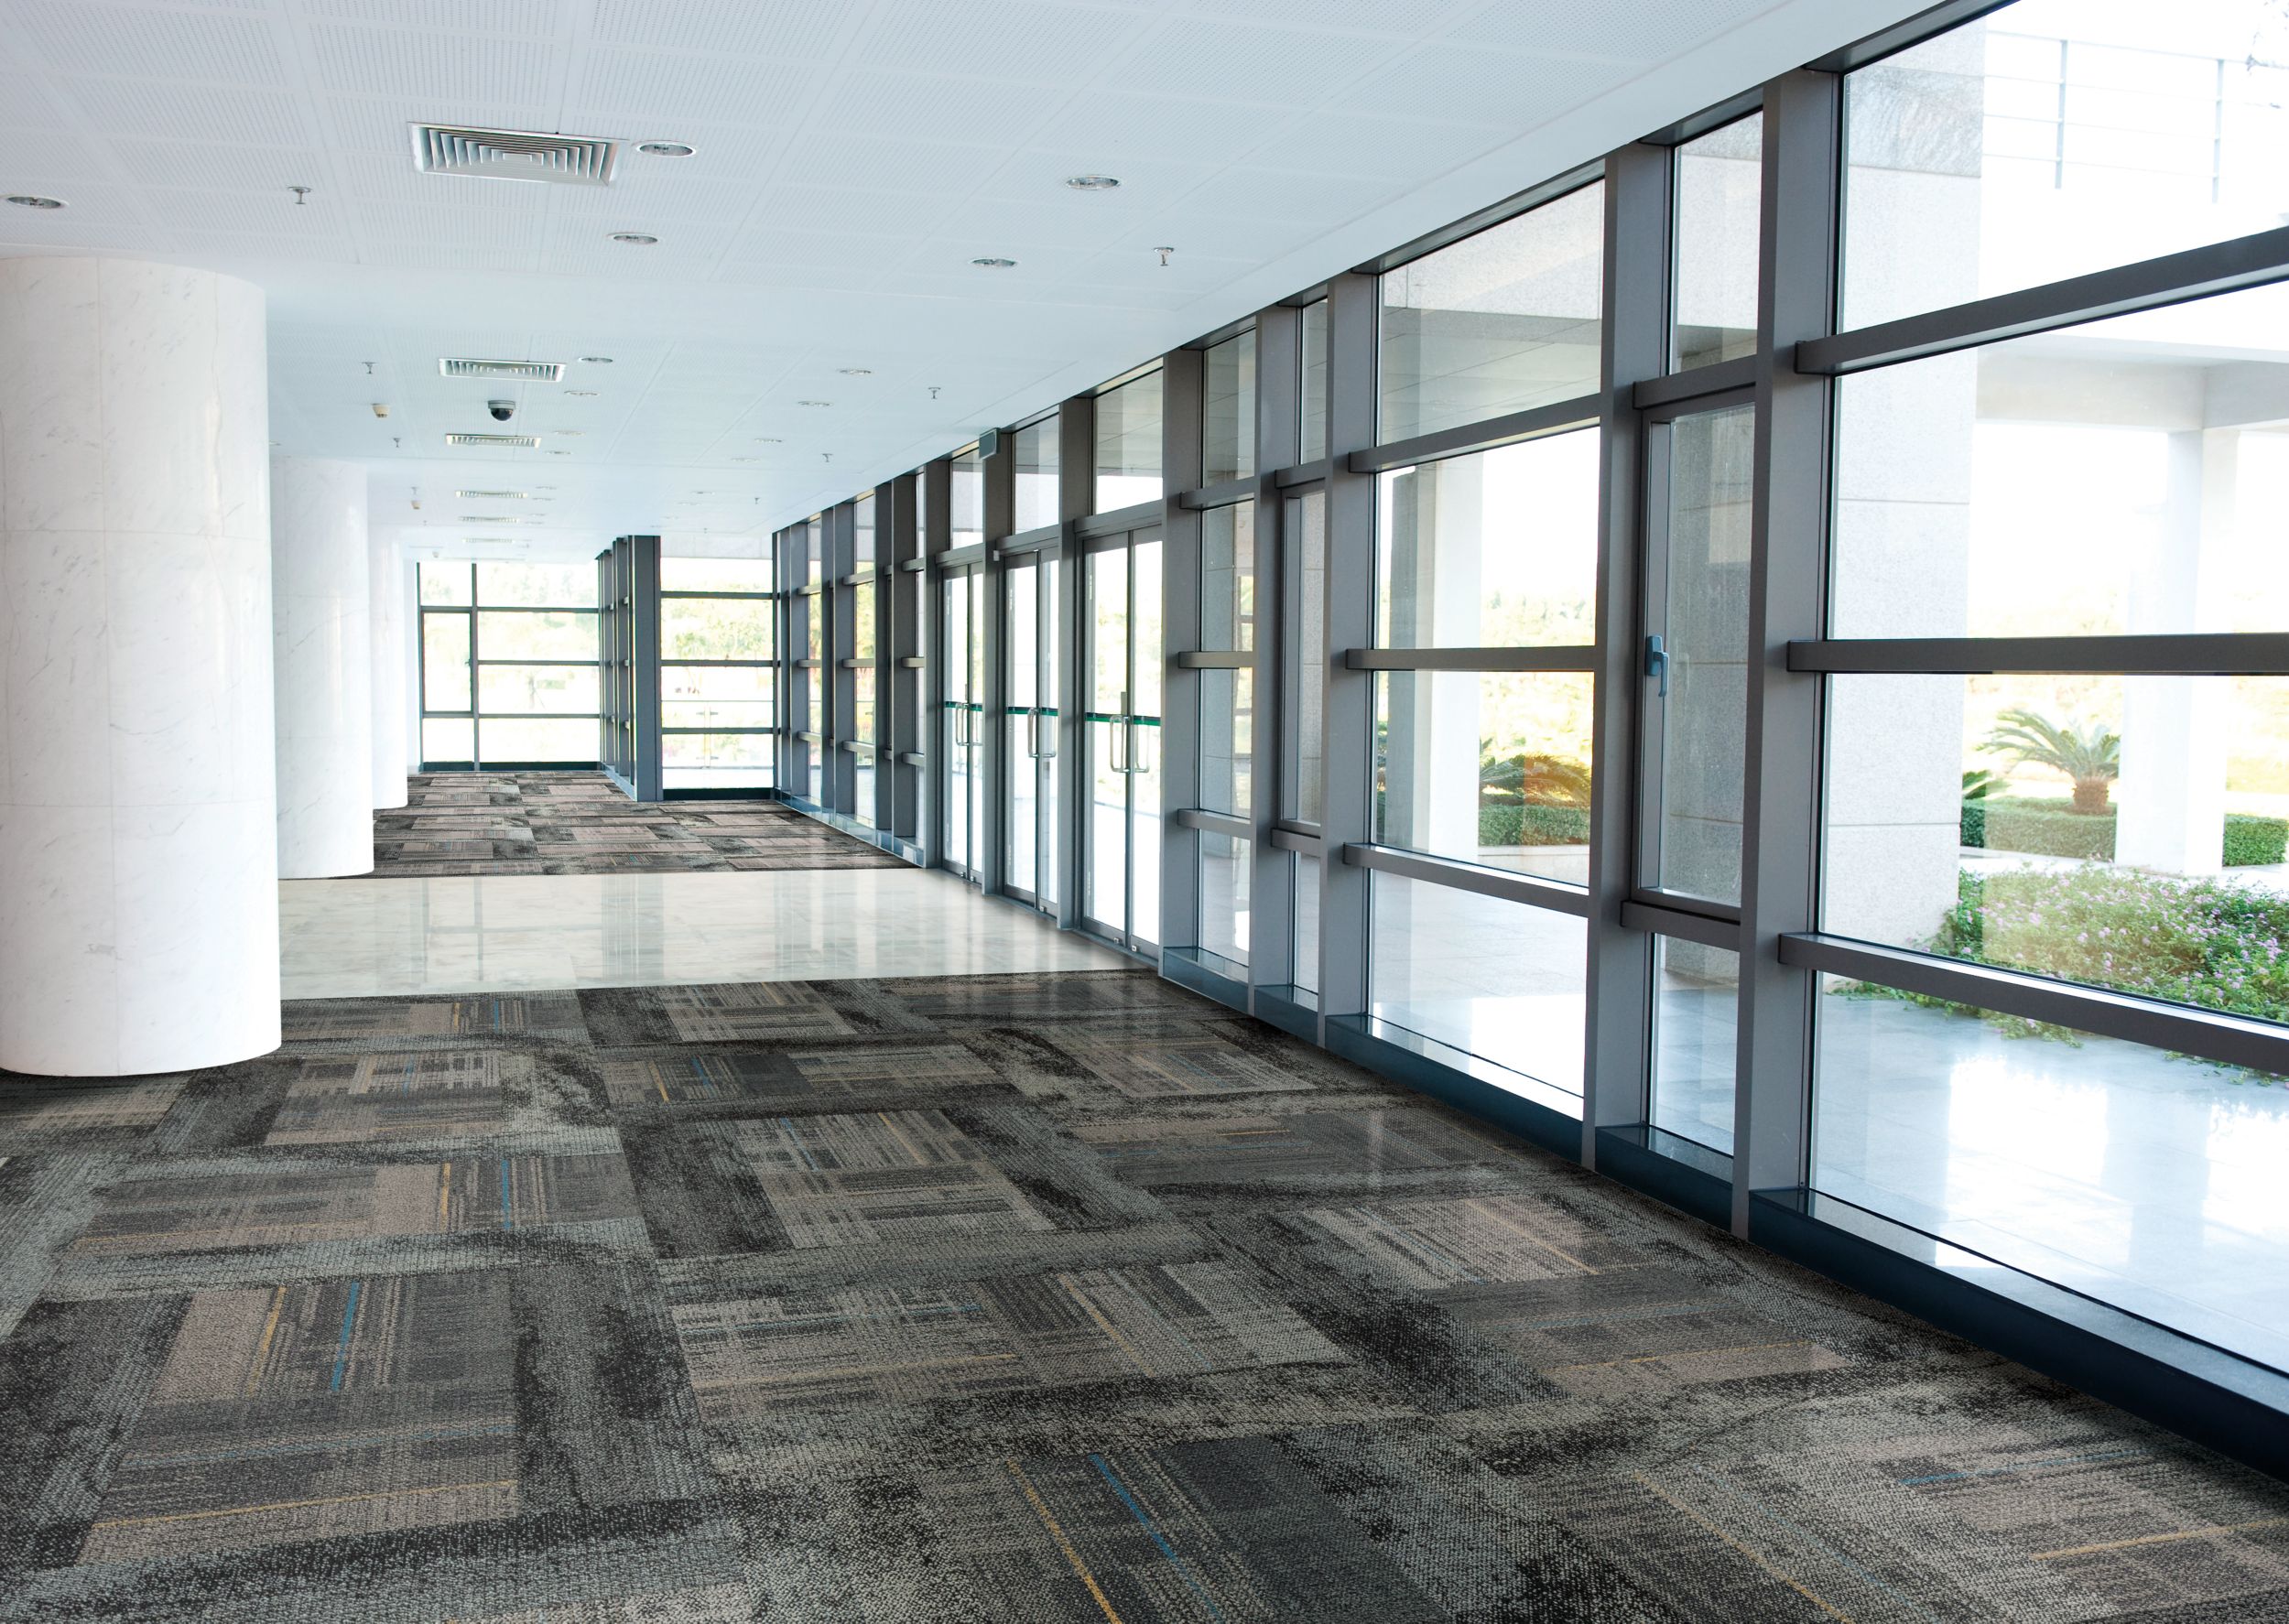 Interface AE312 carpet tile with Neighborhood Smooth plank carpet tile and Interface Textured Stones LVT in corridor with glass walls imagen número 11